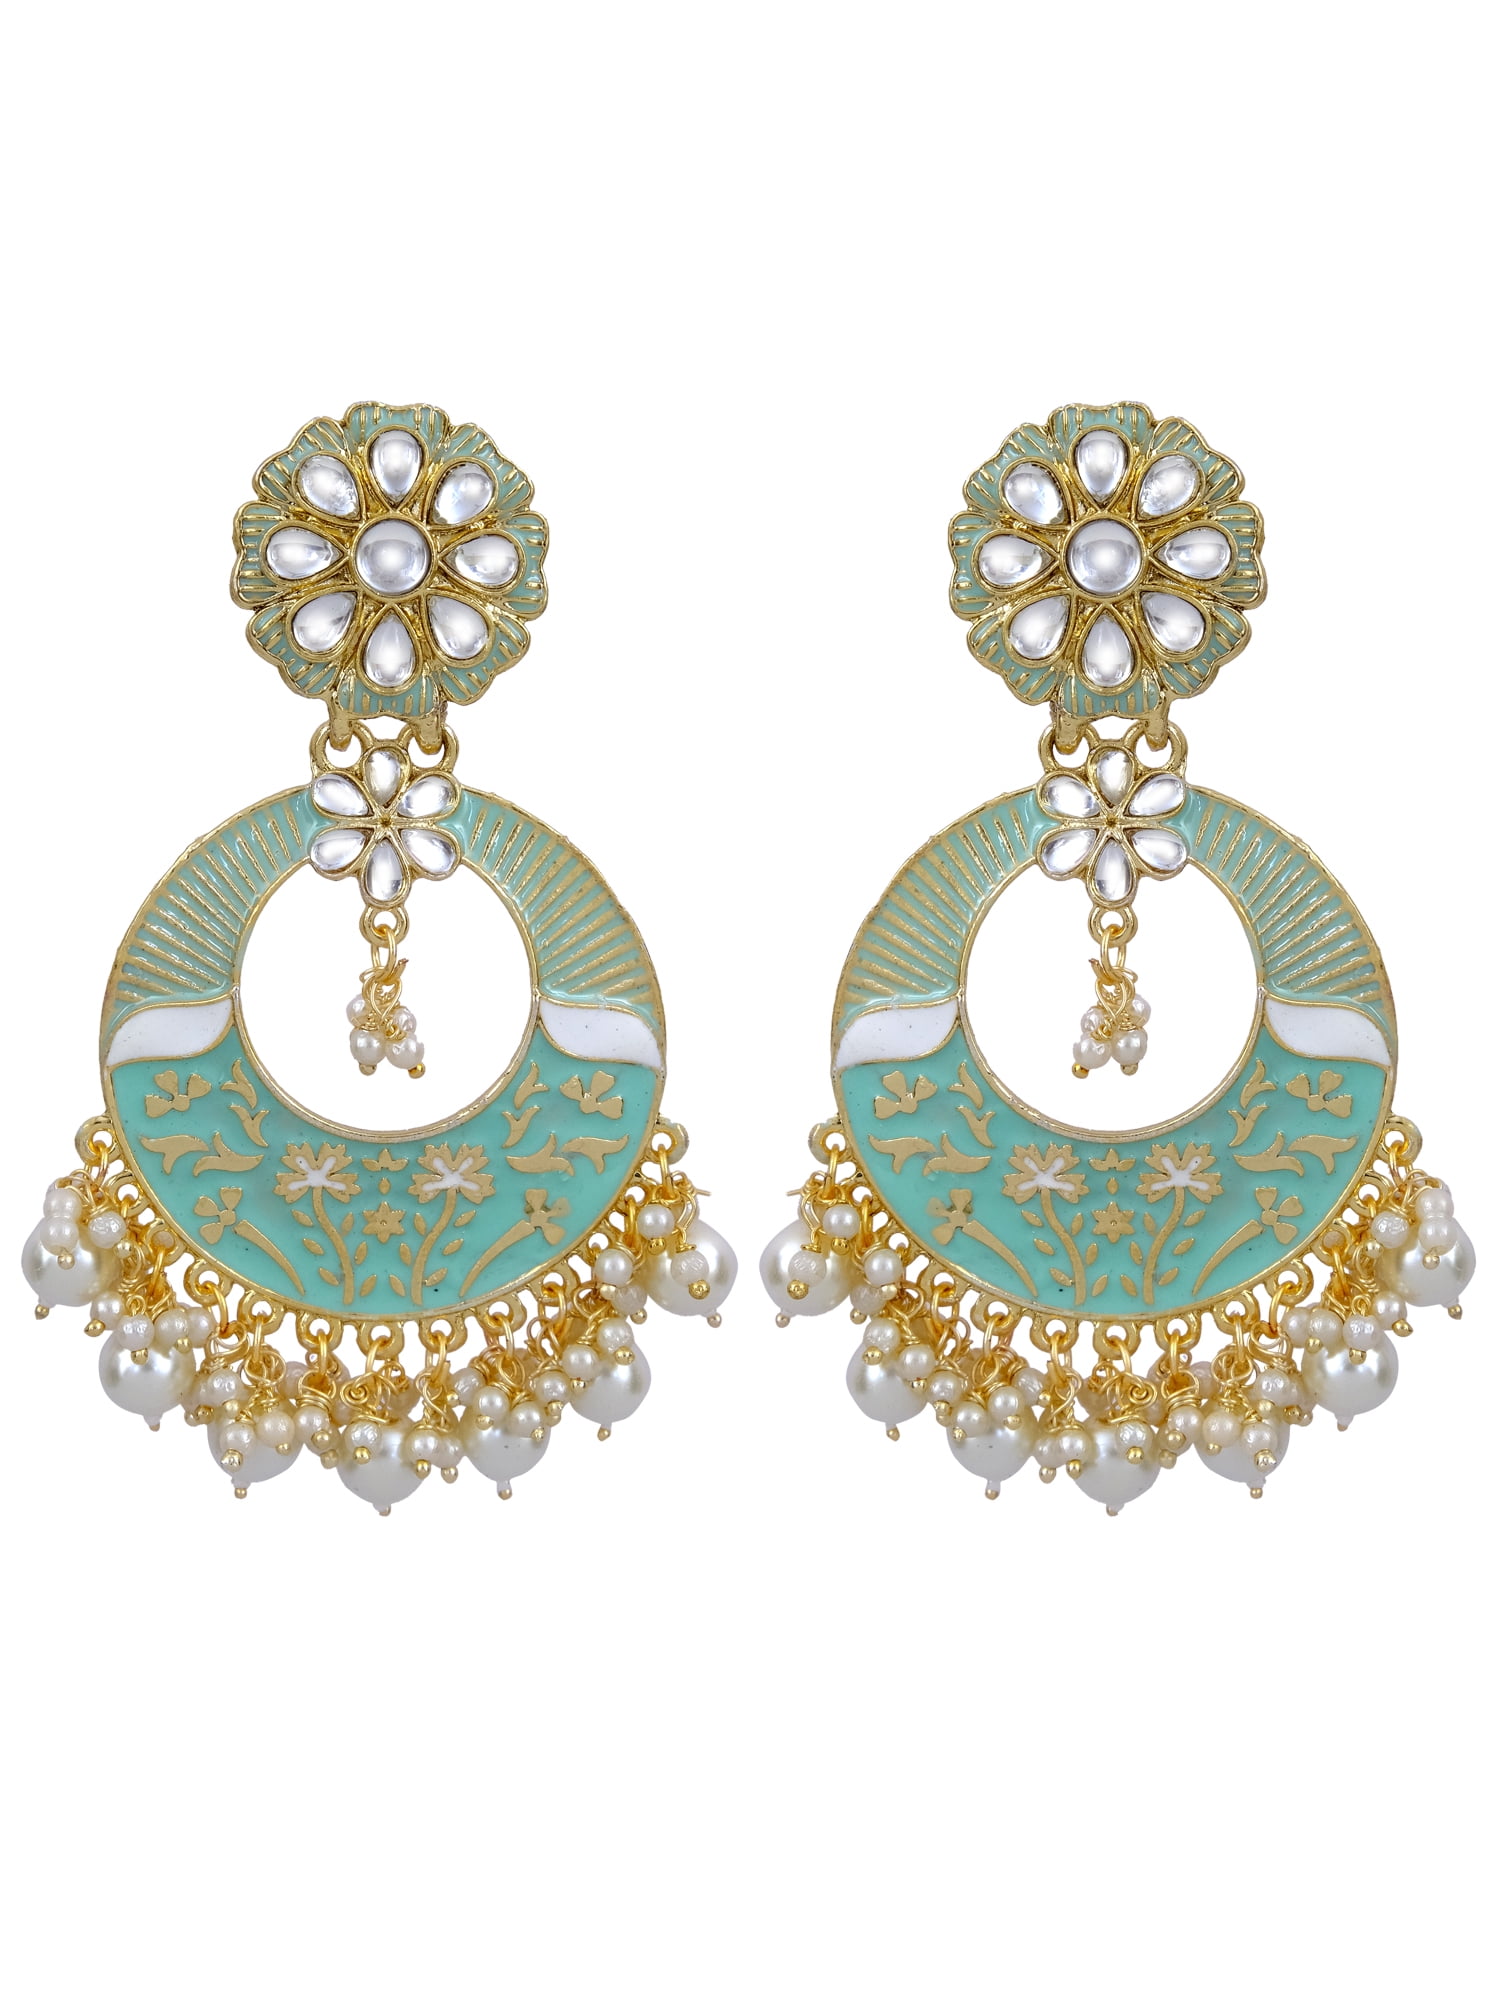 Designer Gold plated Bollywood Traditional Ethnic Earrings Set Fashion Jewelry 